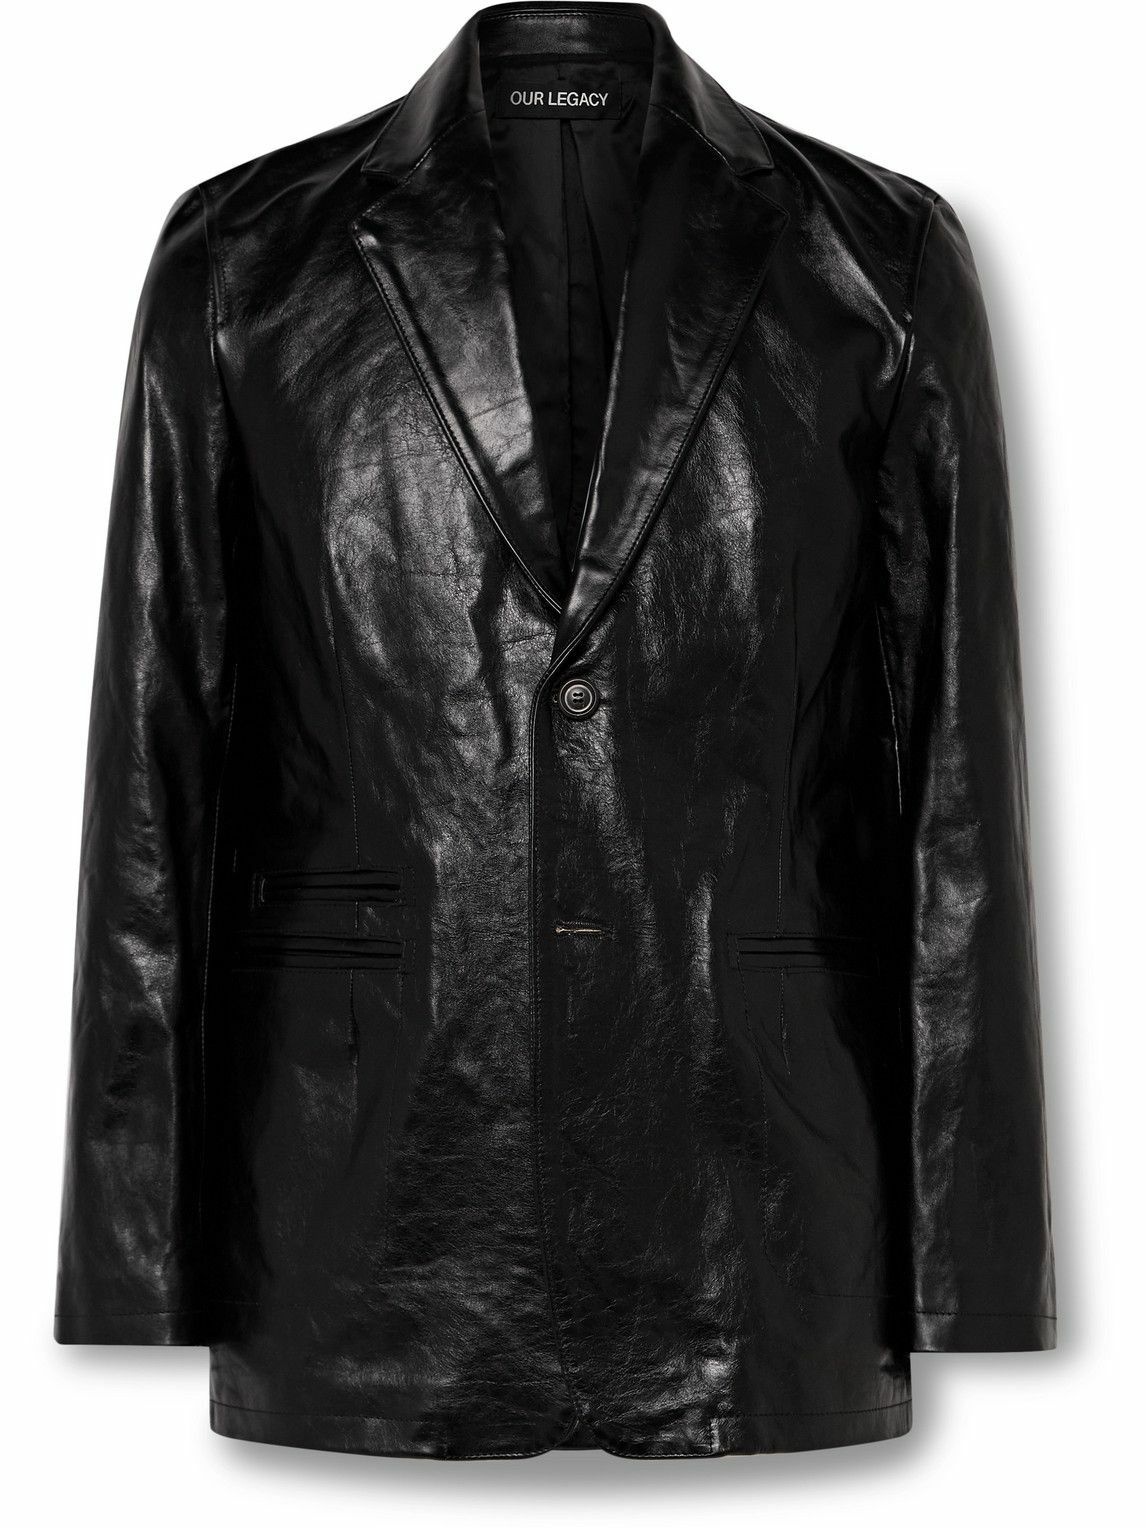 Photo: Our Legacy - Opening Slim-Fit Crinkled-Leather Blazer - Black